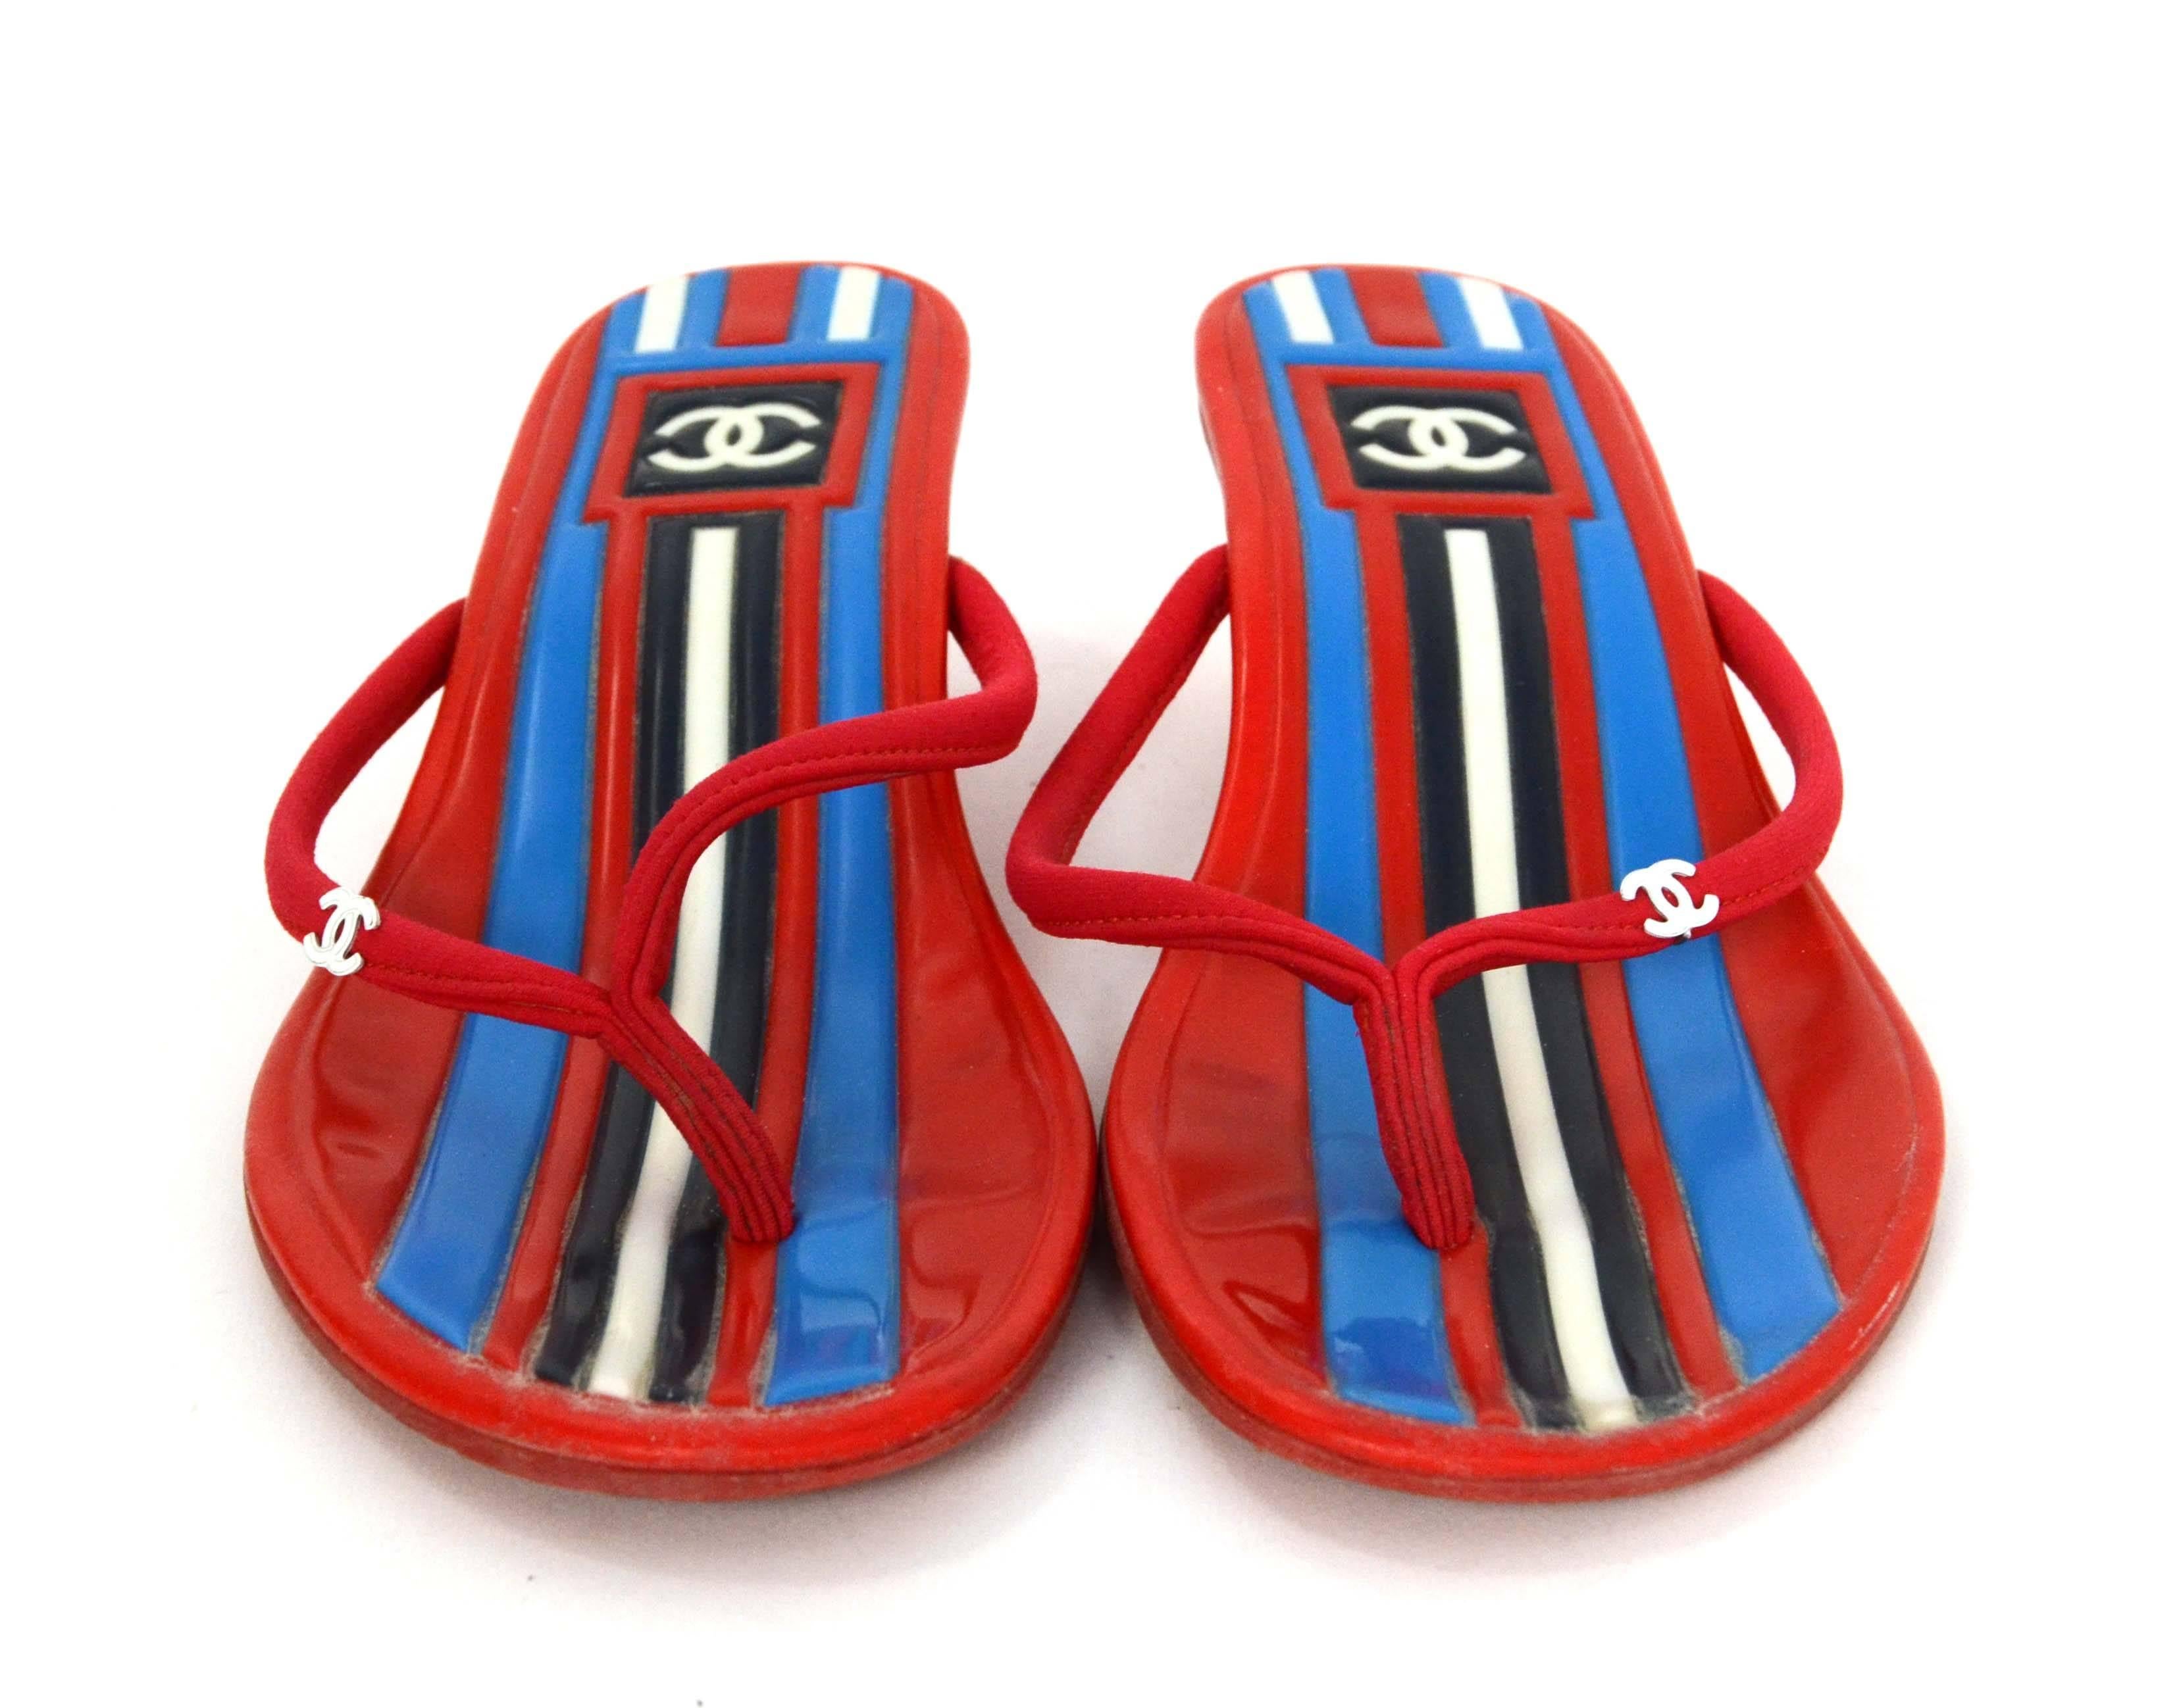 Chanel Red & White Rubber Kitten Heel Thong Sandals 
Features light blue and navy stripes through insole
Made In: Italy
Color: Red, white, blue and navy
Materials: Rubber
Sole Stamp: CC Made in Italy 36 1/2
Overall Condition: Excellent with